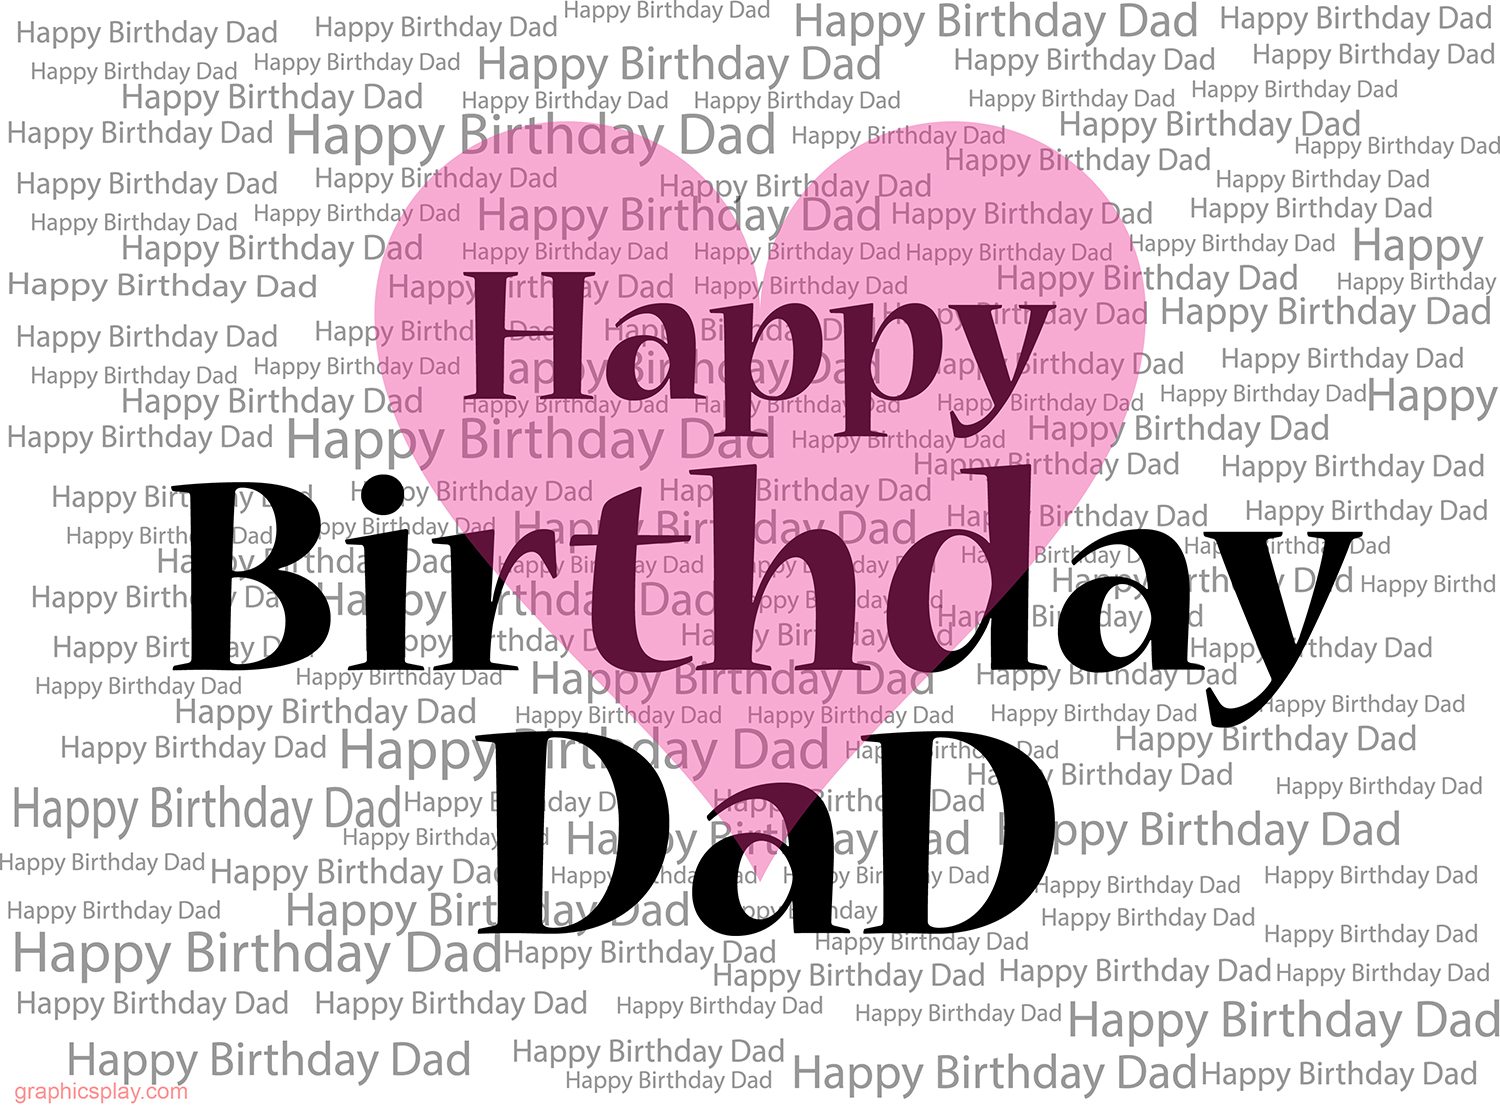  Happy Birthday Dad  Greeting with Love GraphicsPlay